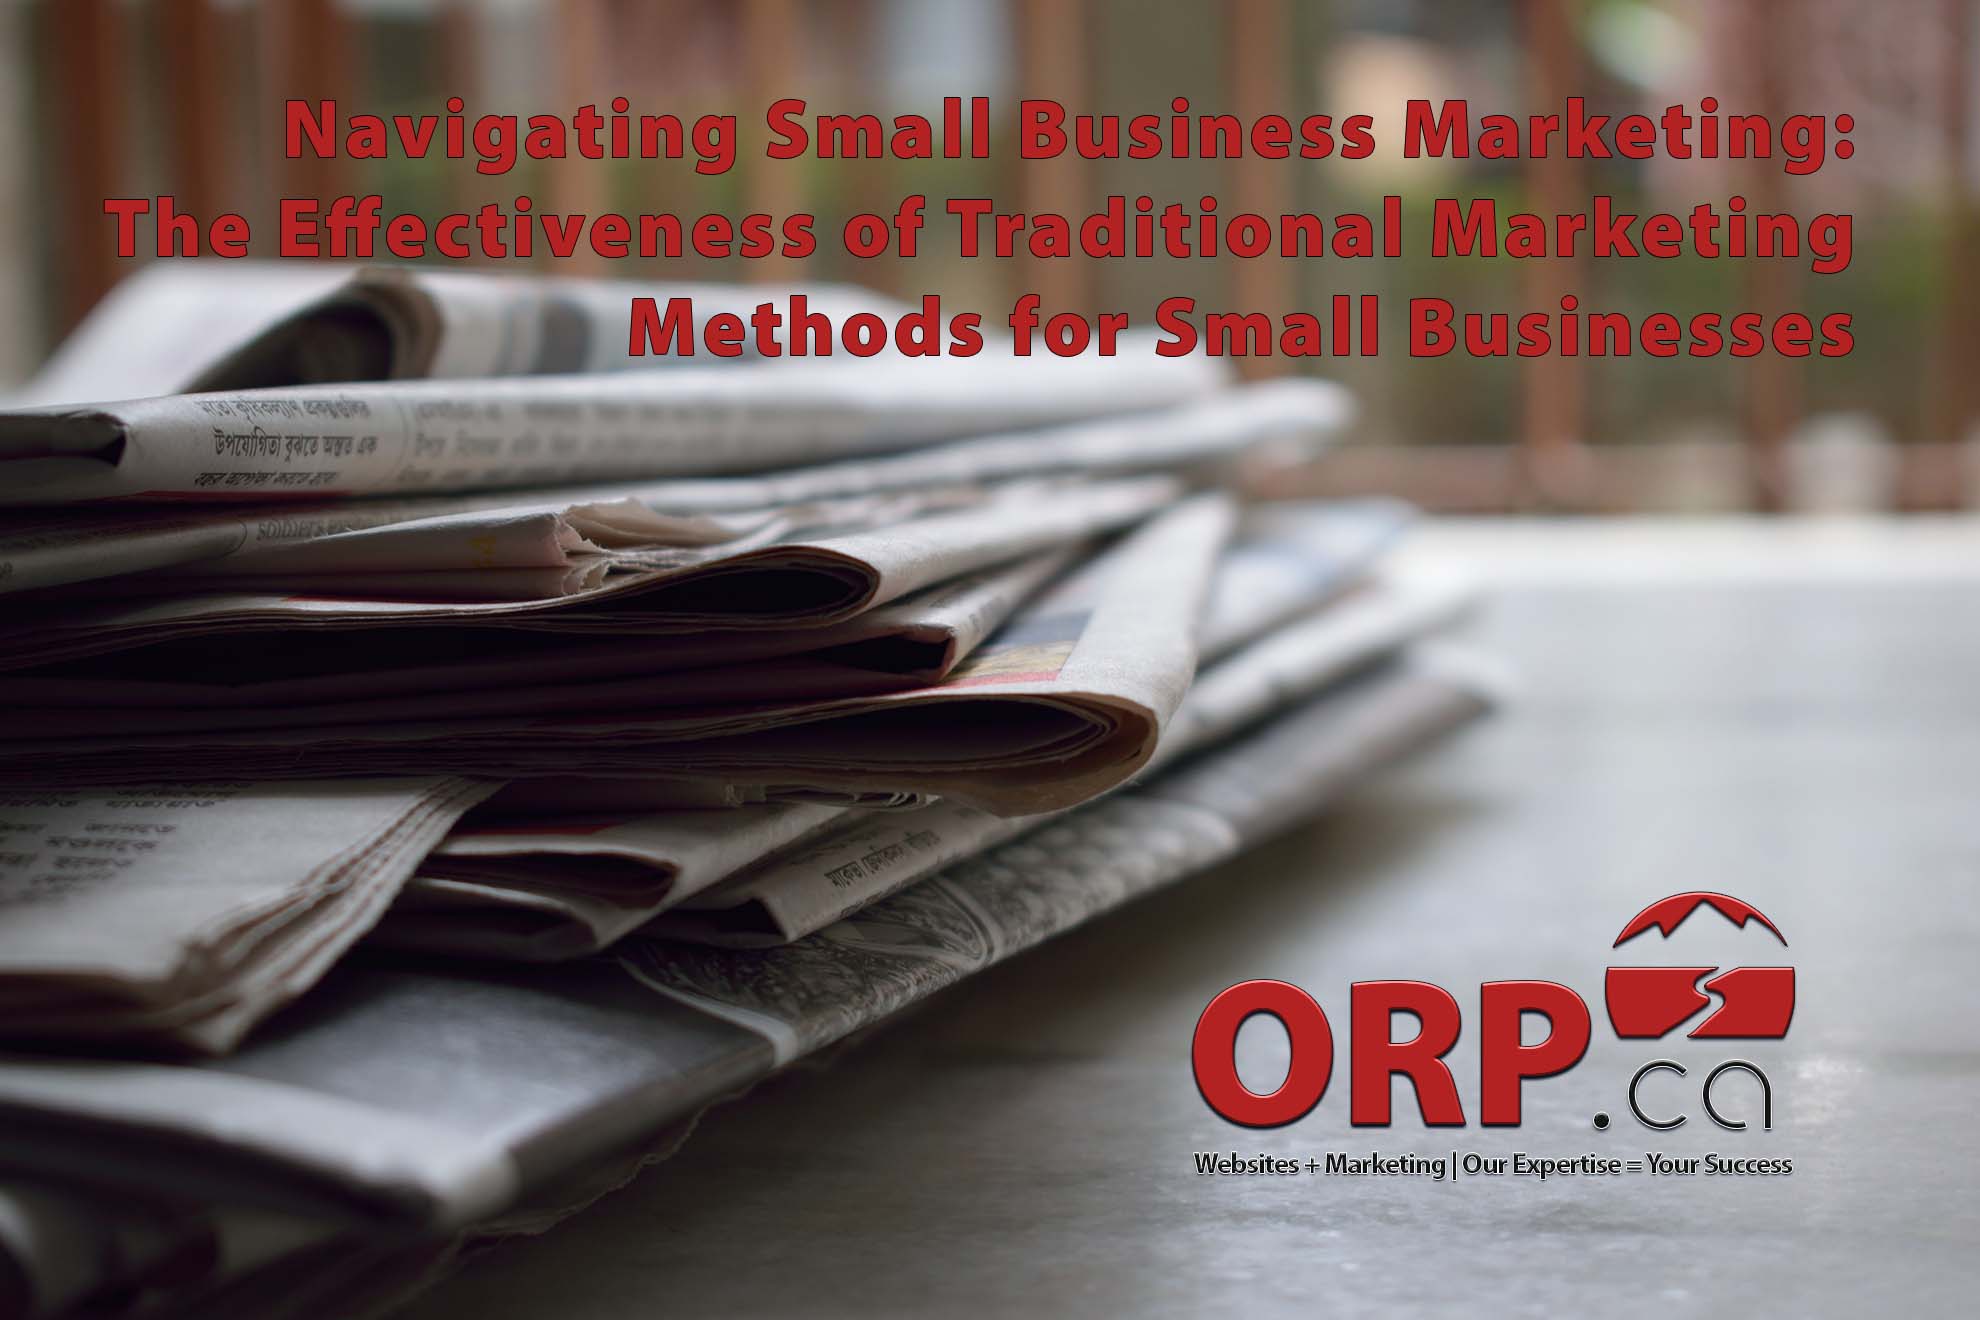 Navigating Small Business Marketing The Effectiveness of Traditional Marketing Methods for Small Businesses - a small business digital marketing article from ORP.ca - Website design and support, digital marketing and consulting services.